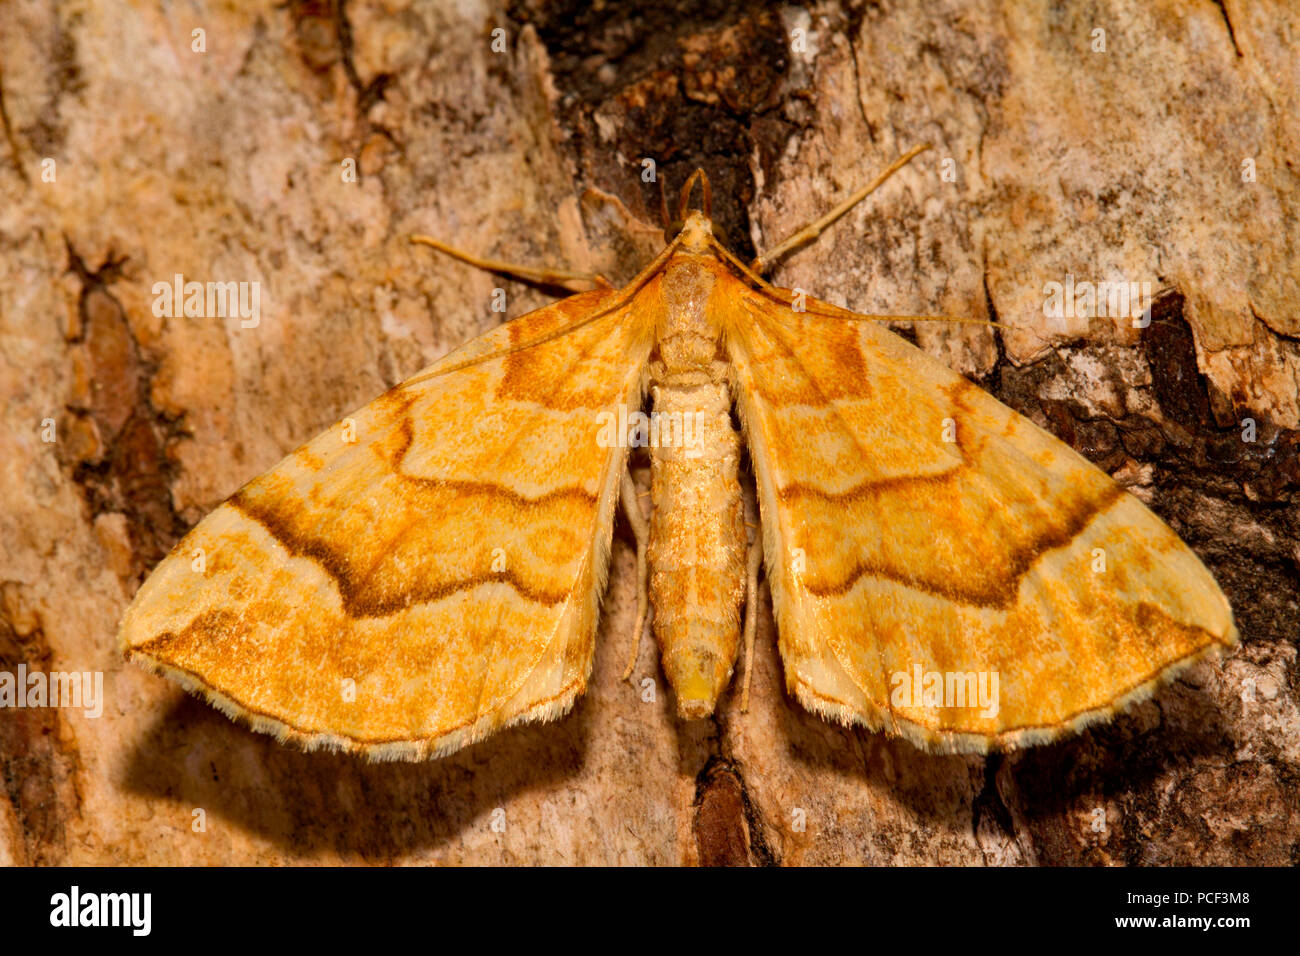 https://c8.alamy.com/comp/PCF3M8/spinach-moth-eulithis-mellinata-PCF3M8.jpg